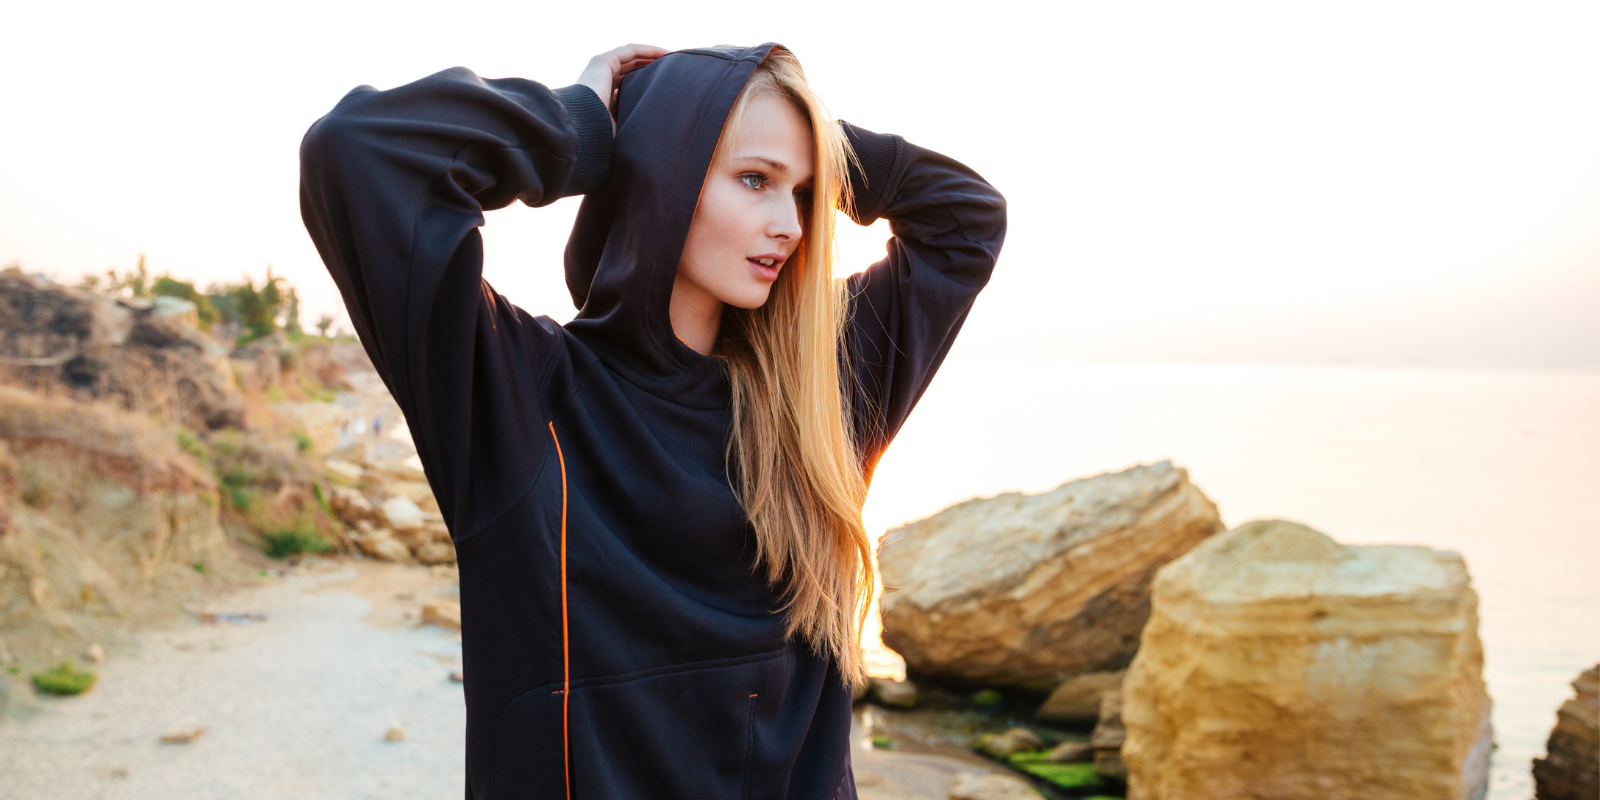 Our Hoodies come in all shapes and styles like oversized, cropped, wide, sporty or just really cute. 